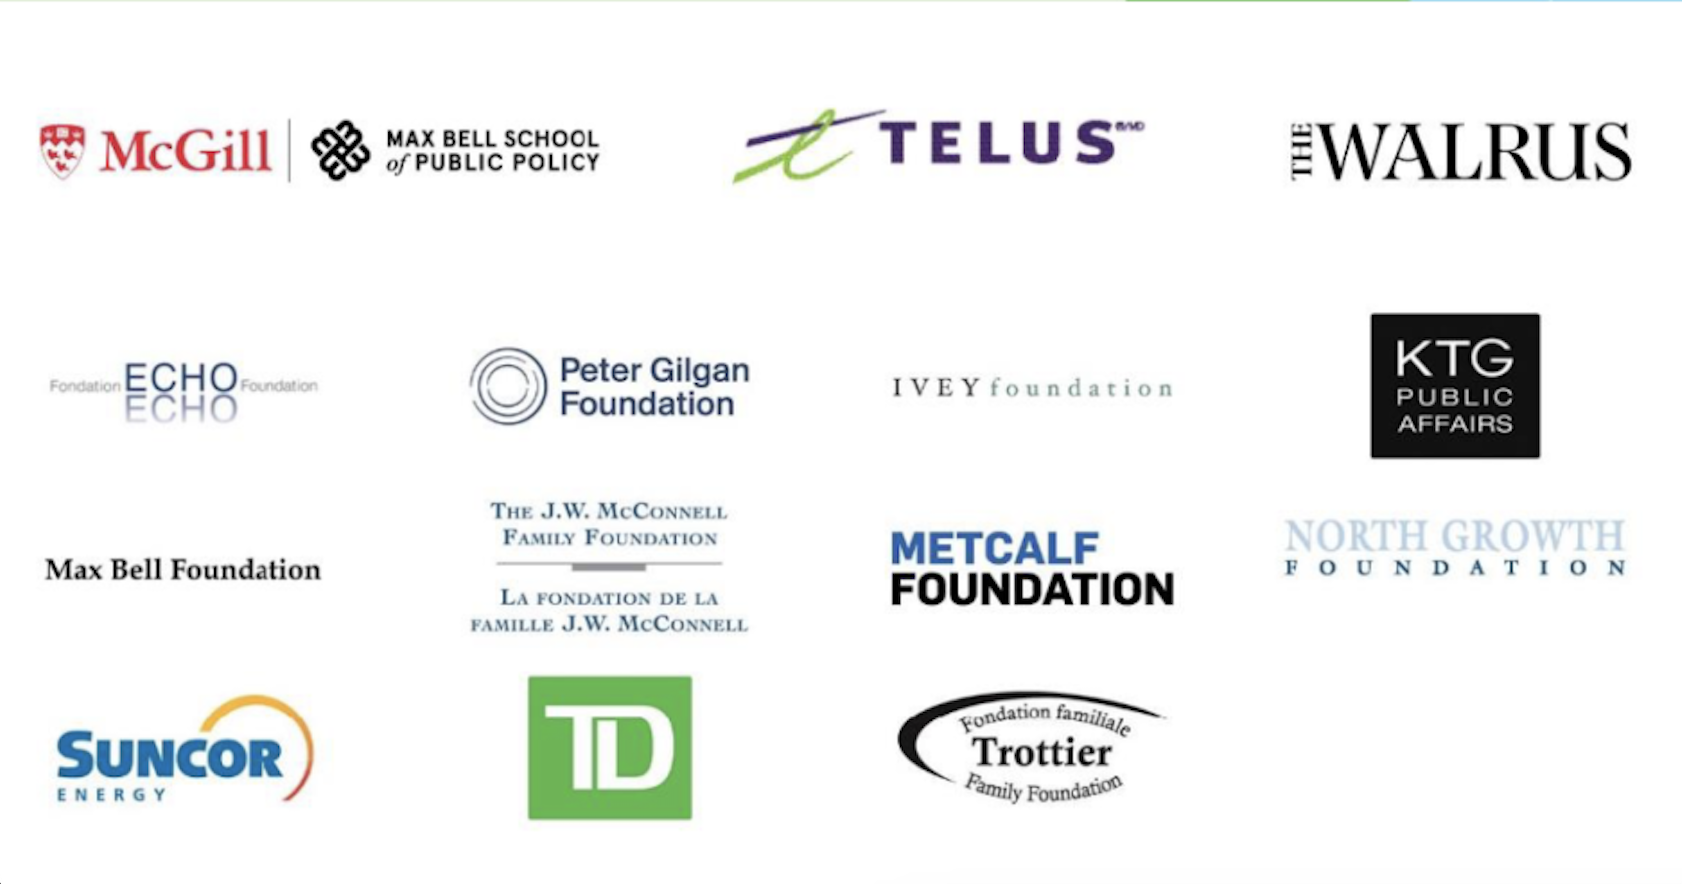 The list of sponsors for the event and their logos: McGill Max Bell School of Public Policy, TELUS, The WALRUS, ECHO, Peter Gilgan Foundation, IVEY foundation, KTG PUBLIC AFFAIRS, Max Bell Foundation. The J.W. MCCONNELL FAMILY FOUNDATION, METCALF FOUNDATION, NORTH GROWTH FOUNDATION, SUNCOR ENERGY, TD, and Trottier.